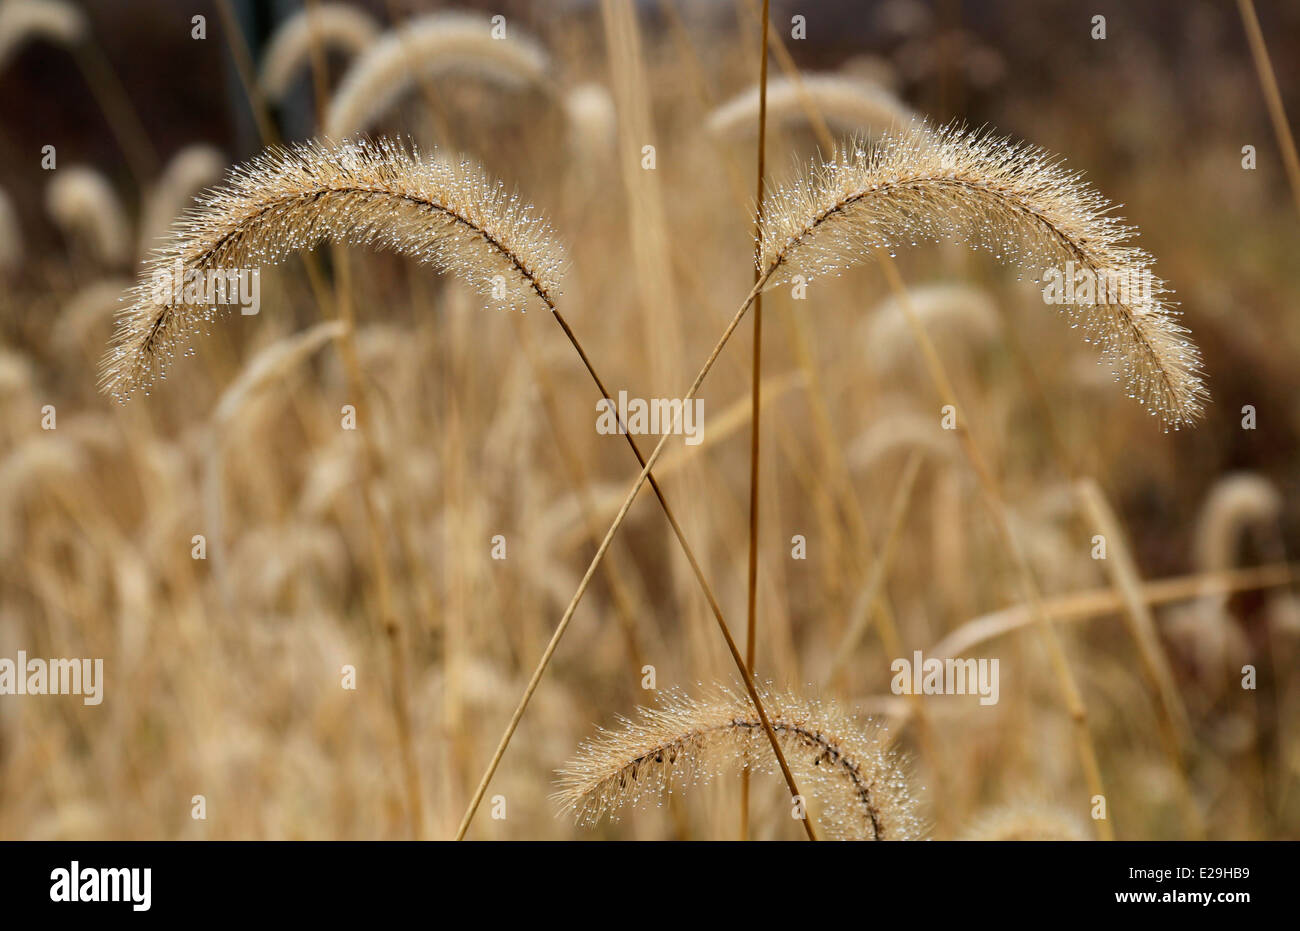 Tall criss-cross grass with dew drops. Stock Photo